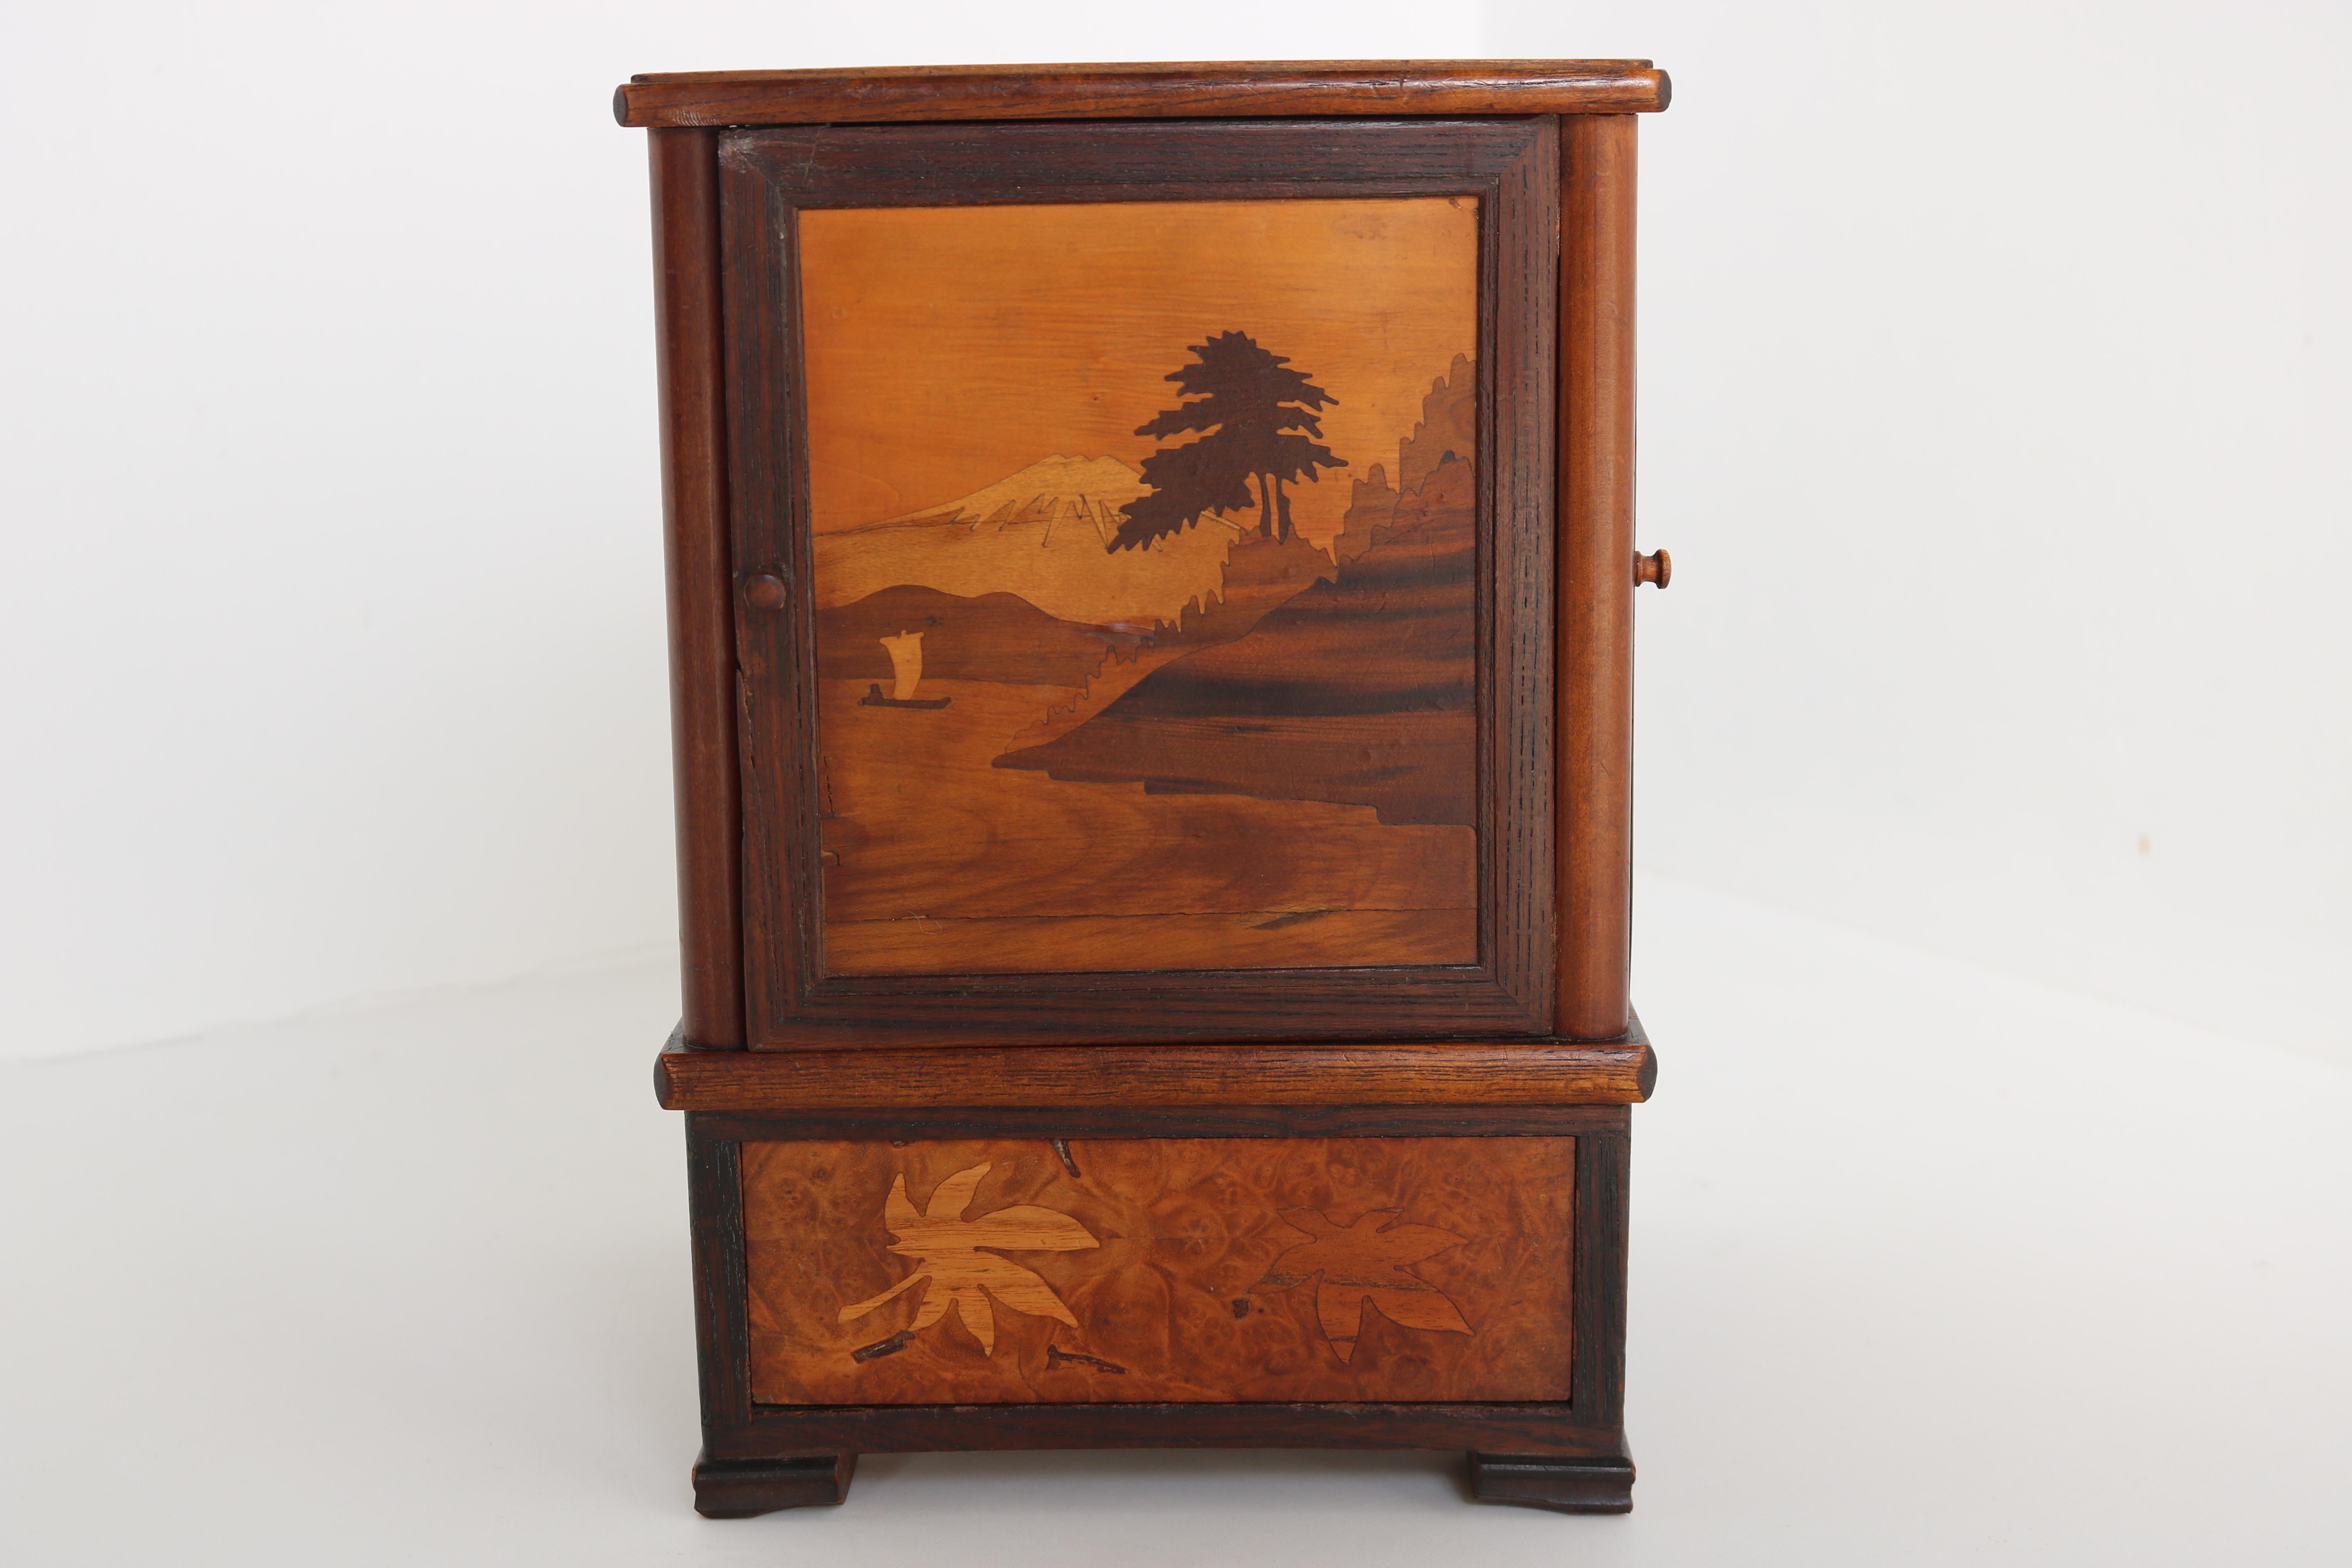 Antique French Inlaid Marquetry Cigar Box 1900 Cigarette Cabinet Desk Decoration For Sale 5